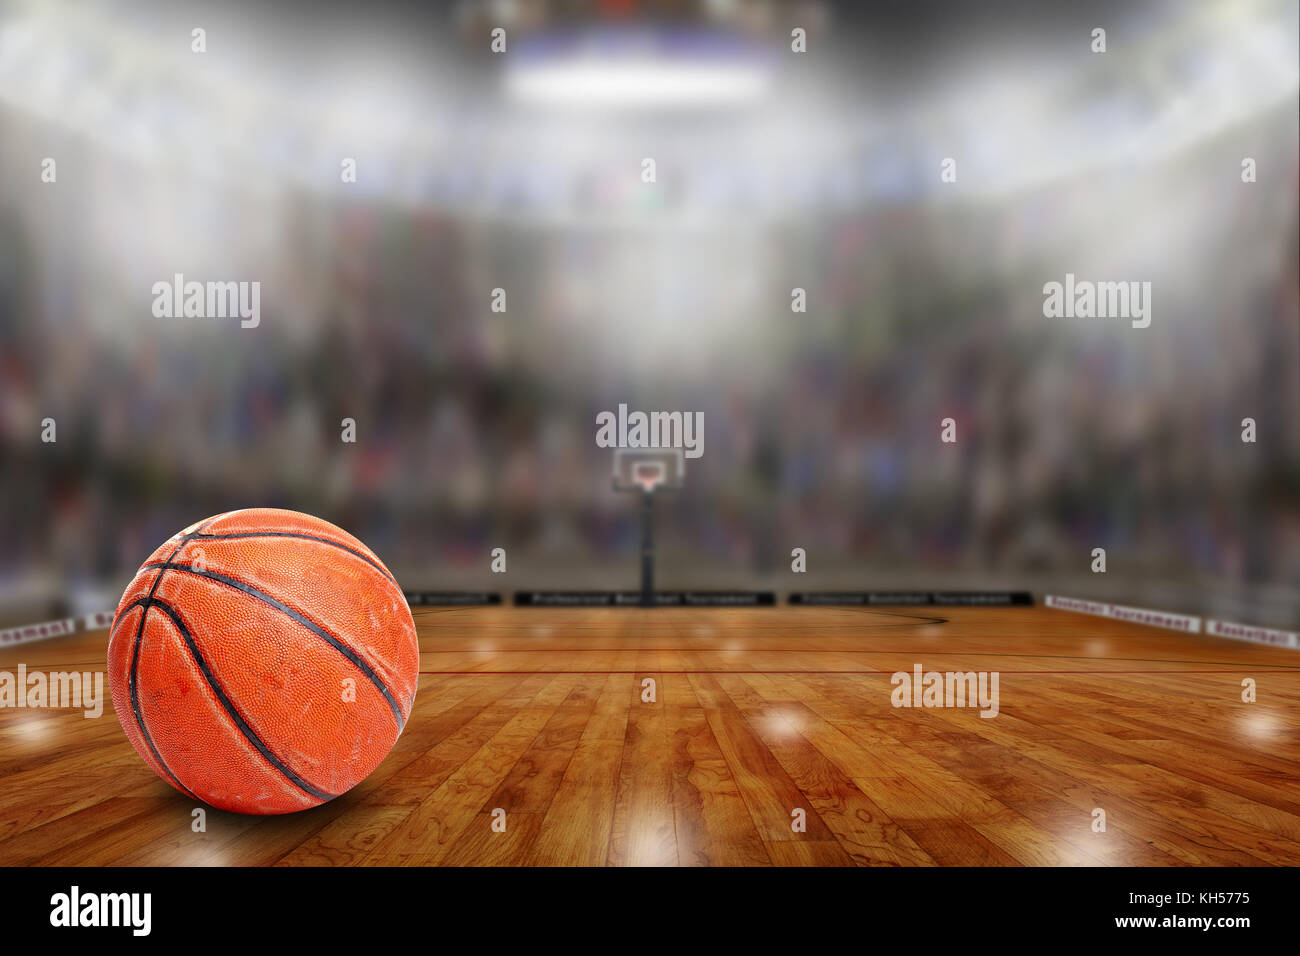 Low angle view of fictitious basketball arena with sports fans in the stands. Focus on foreground with deliberate shallow depth of field on background Stock Photo